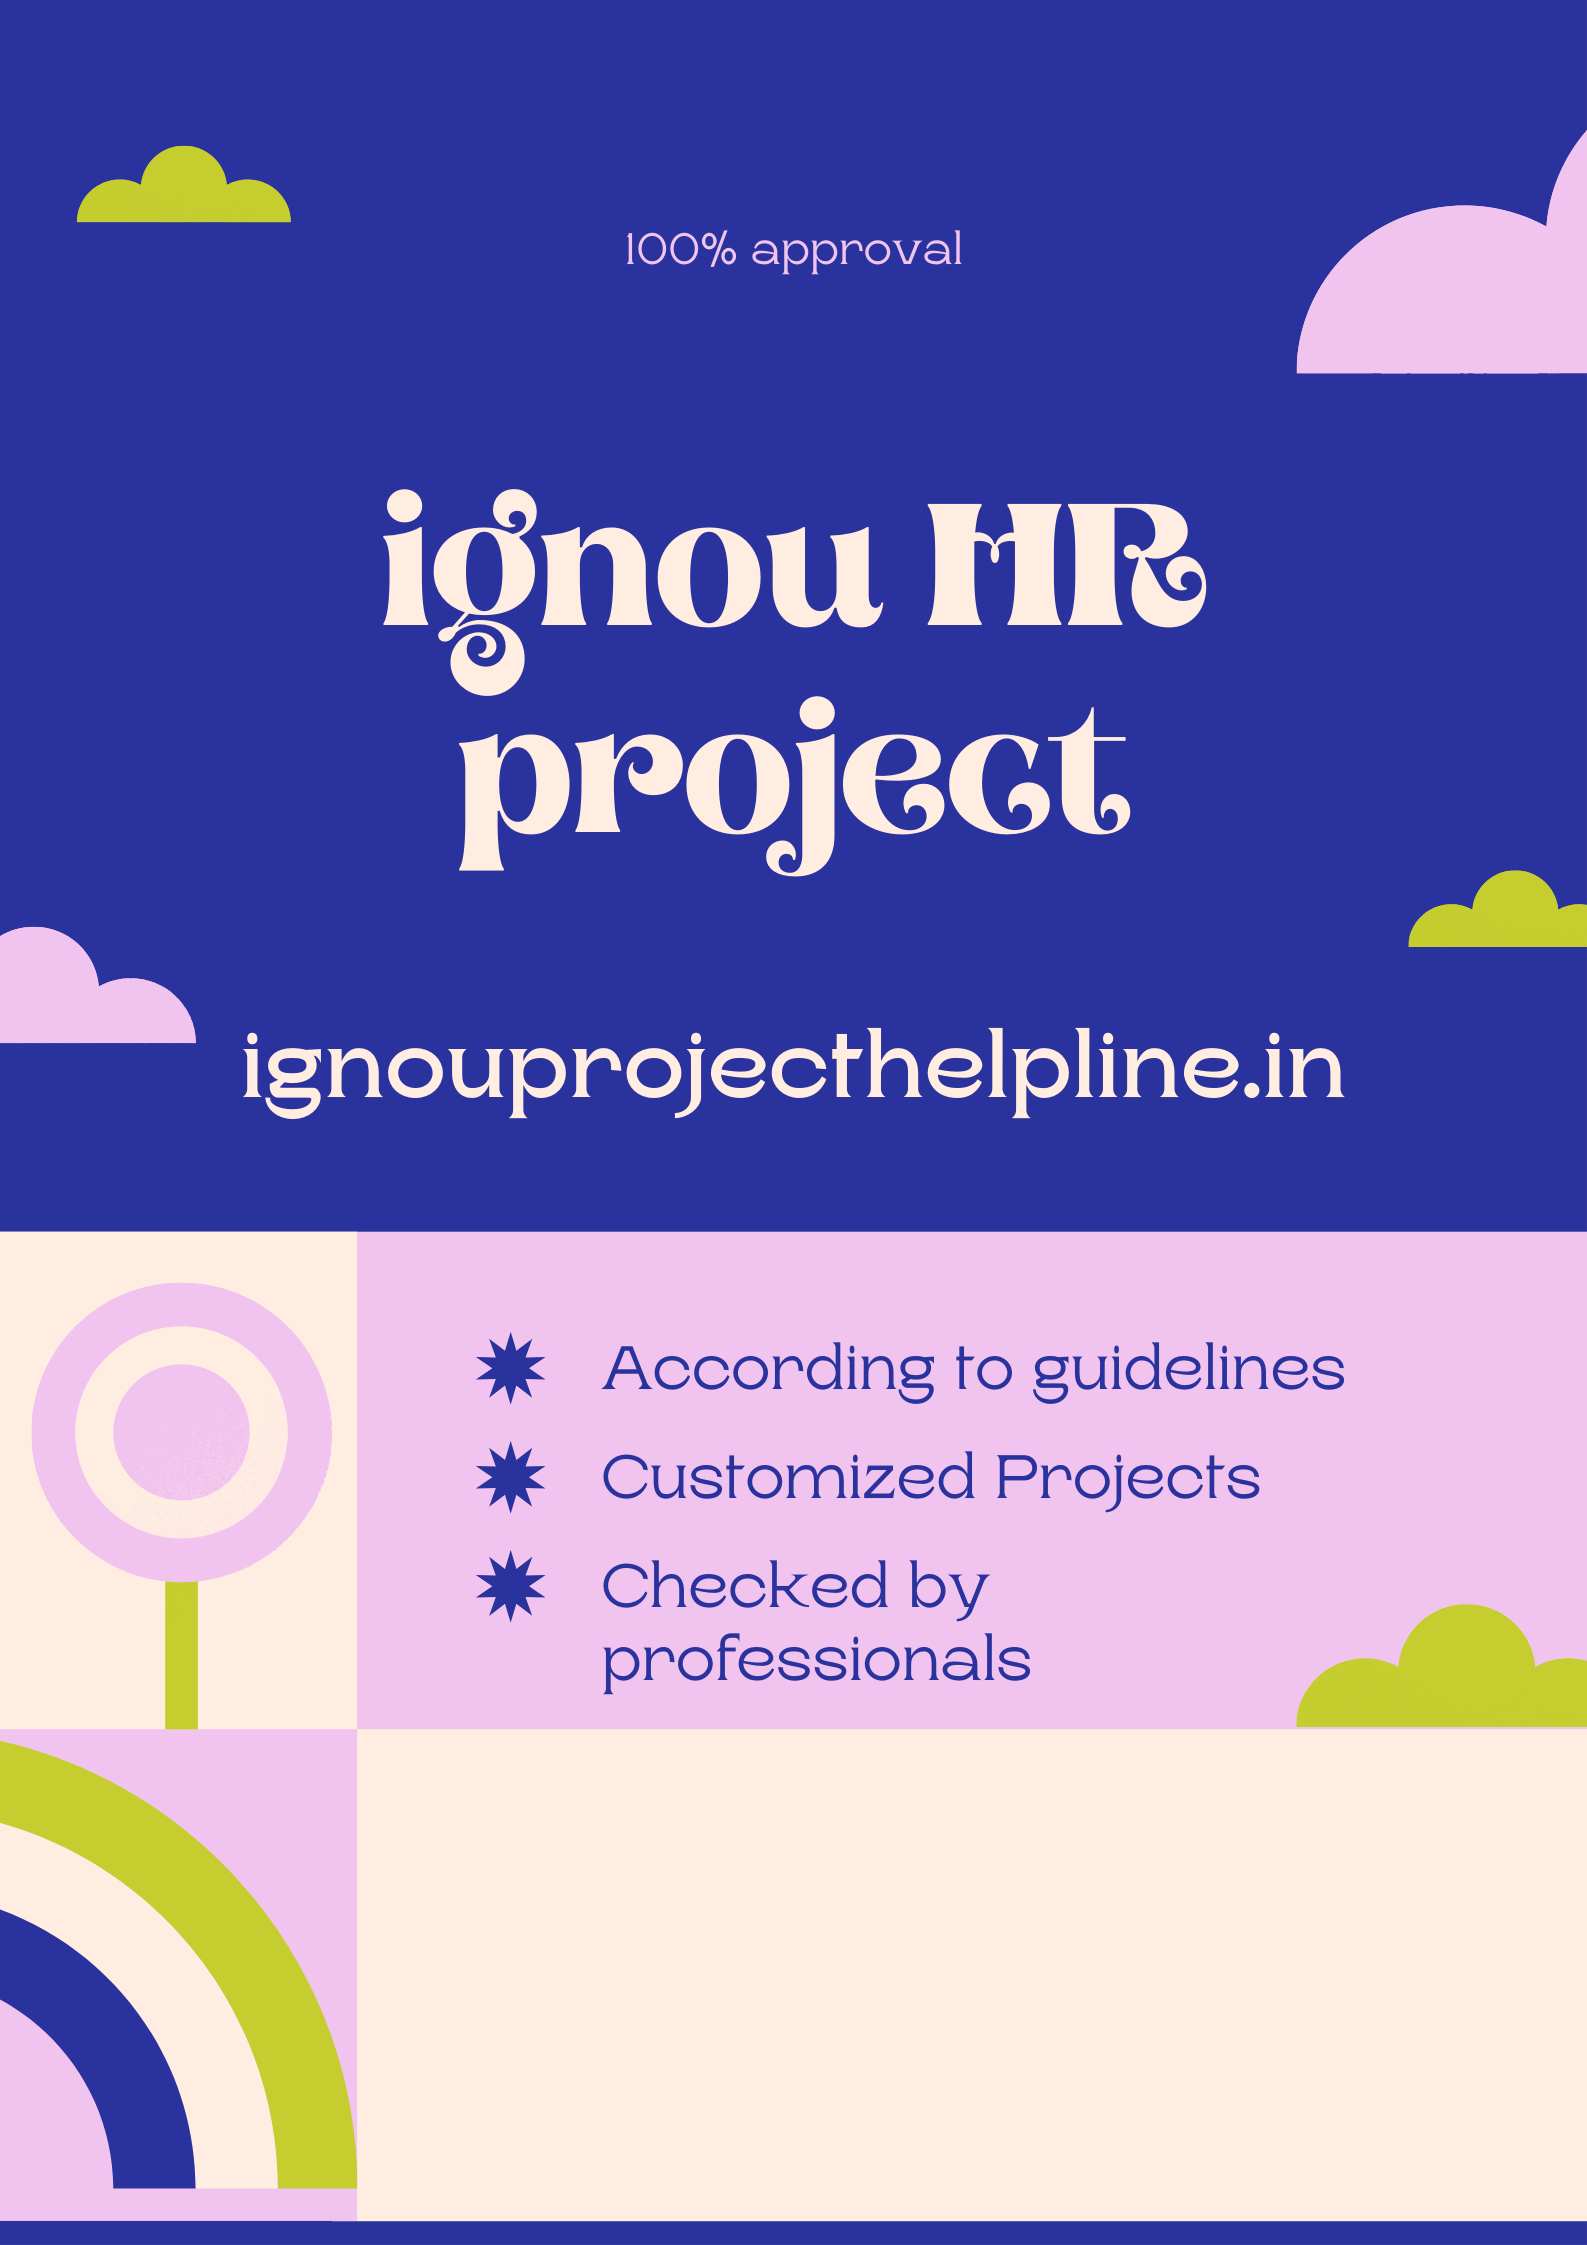 IGNOU HR PROJECTS AND SYNOPSIS